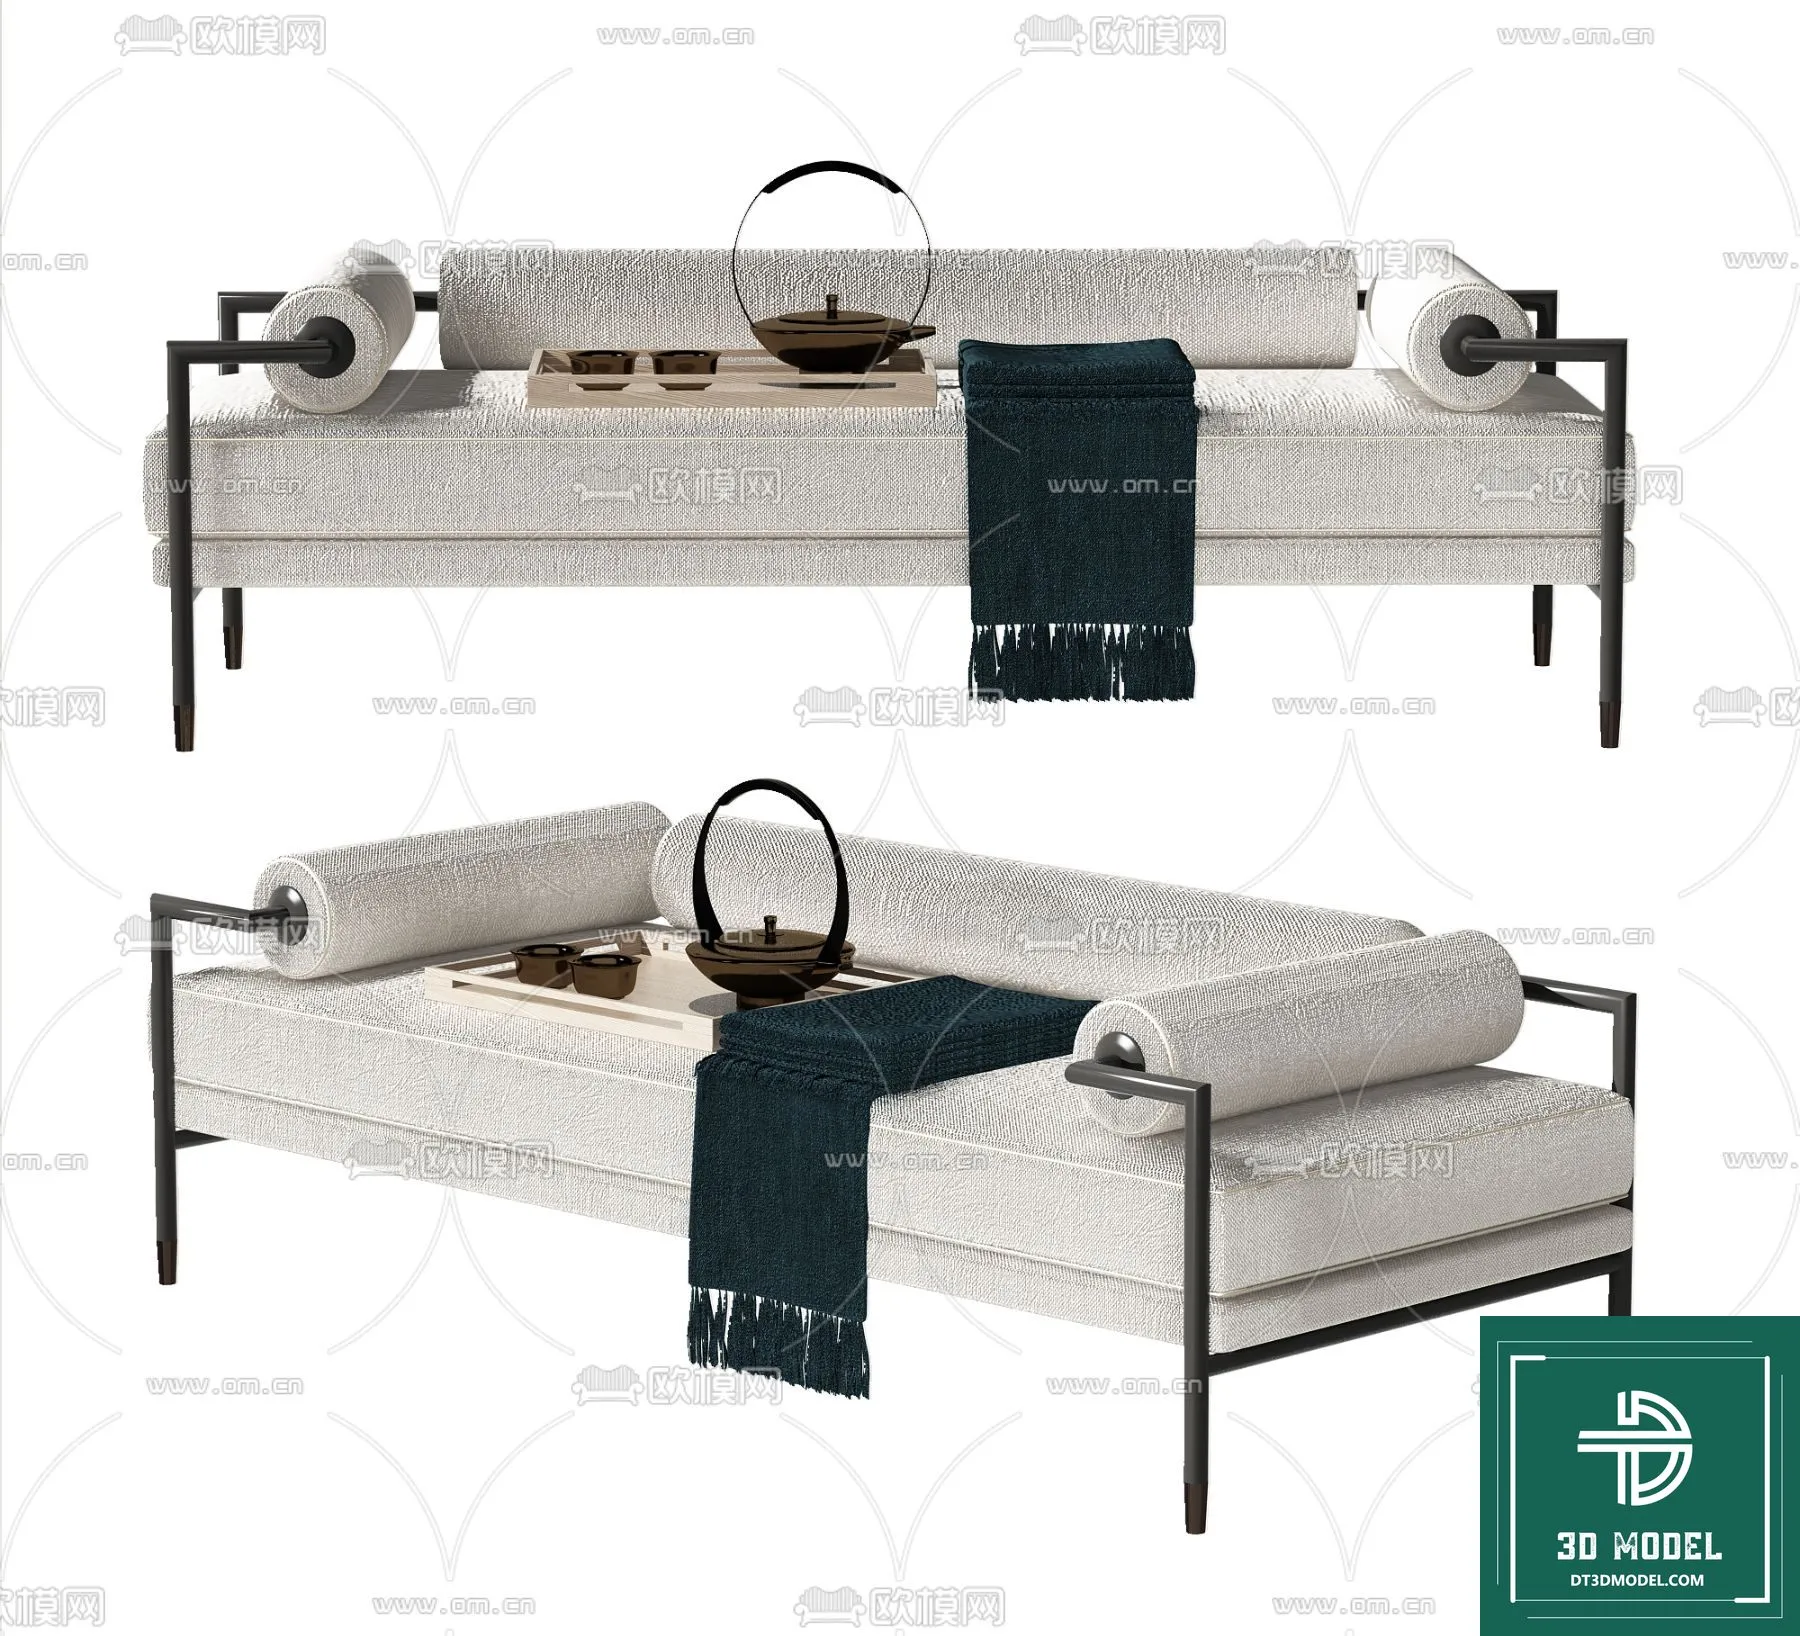 INDOCHINE STYLE – 3D MODELS – 452